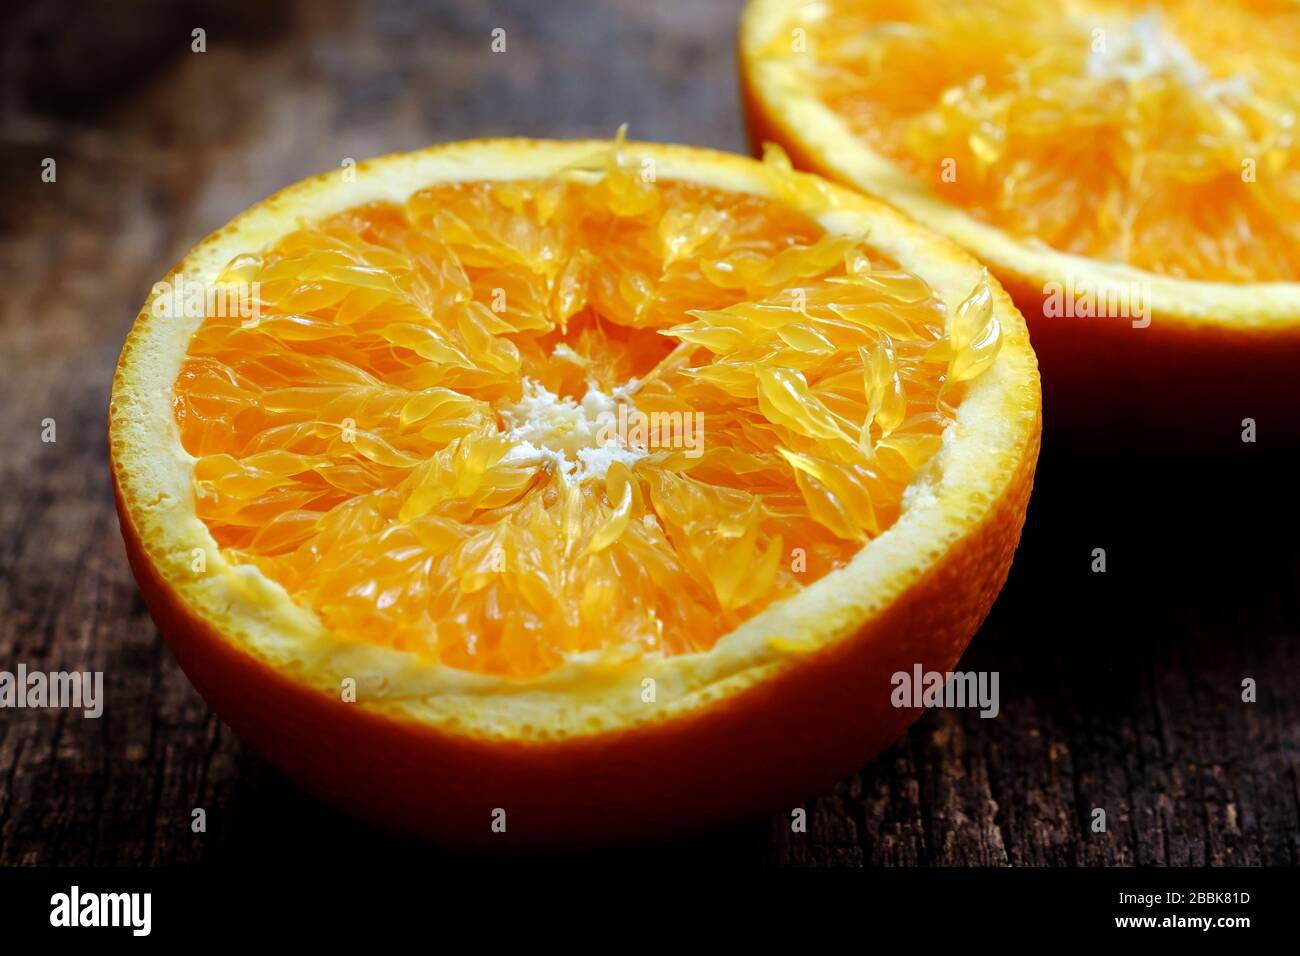 Close up from high view of yellow orange fruit cut two in half, freshness raw fruit of citrus, rich vitamin c, good for health on wooden background Stock Photo